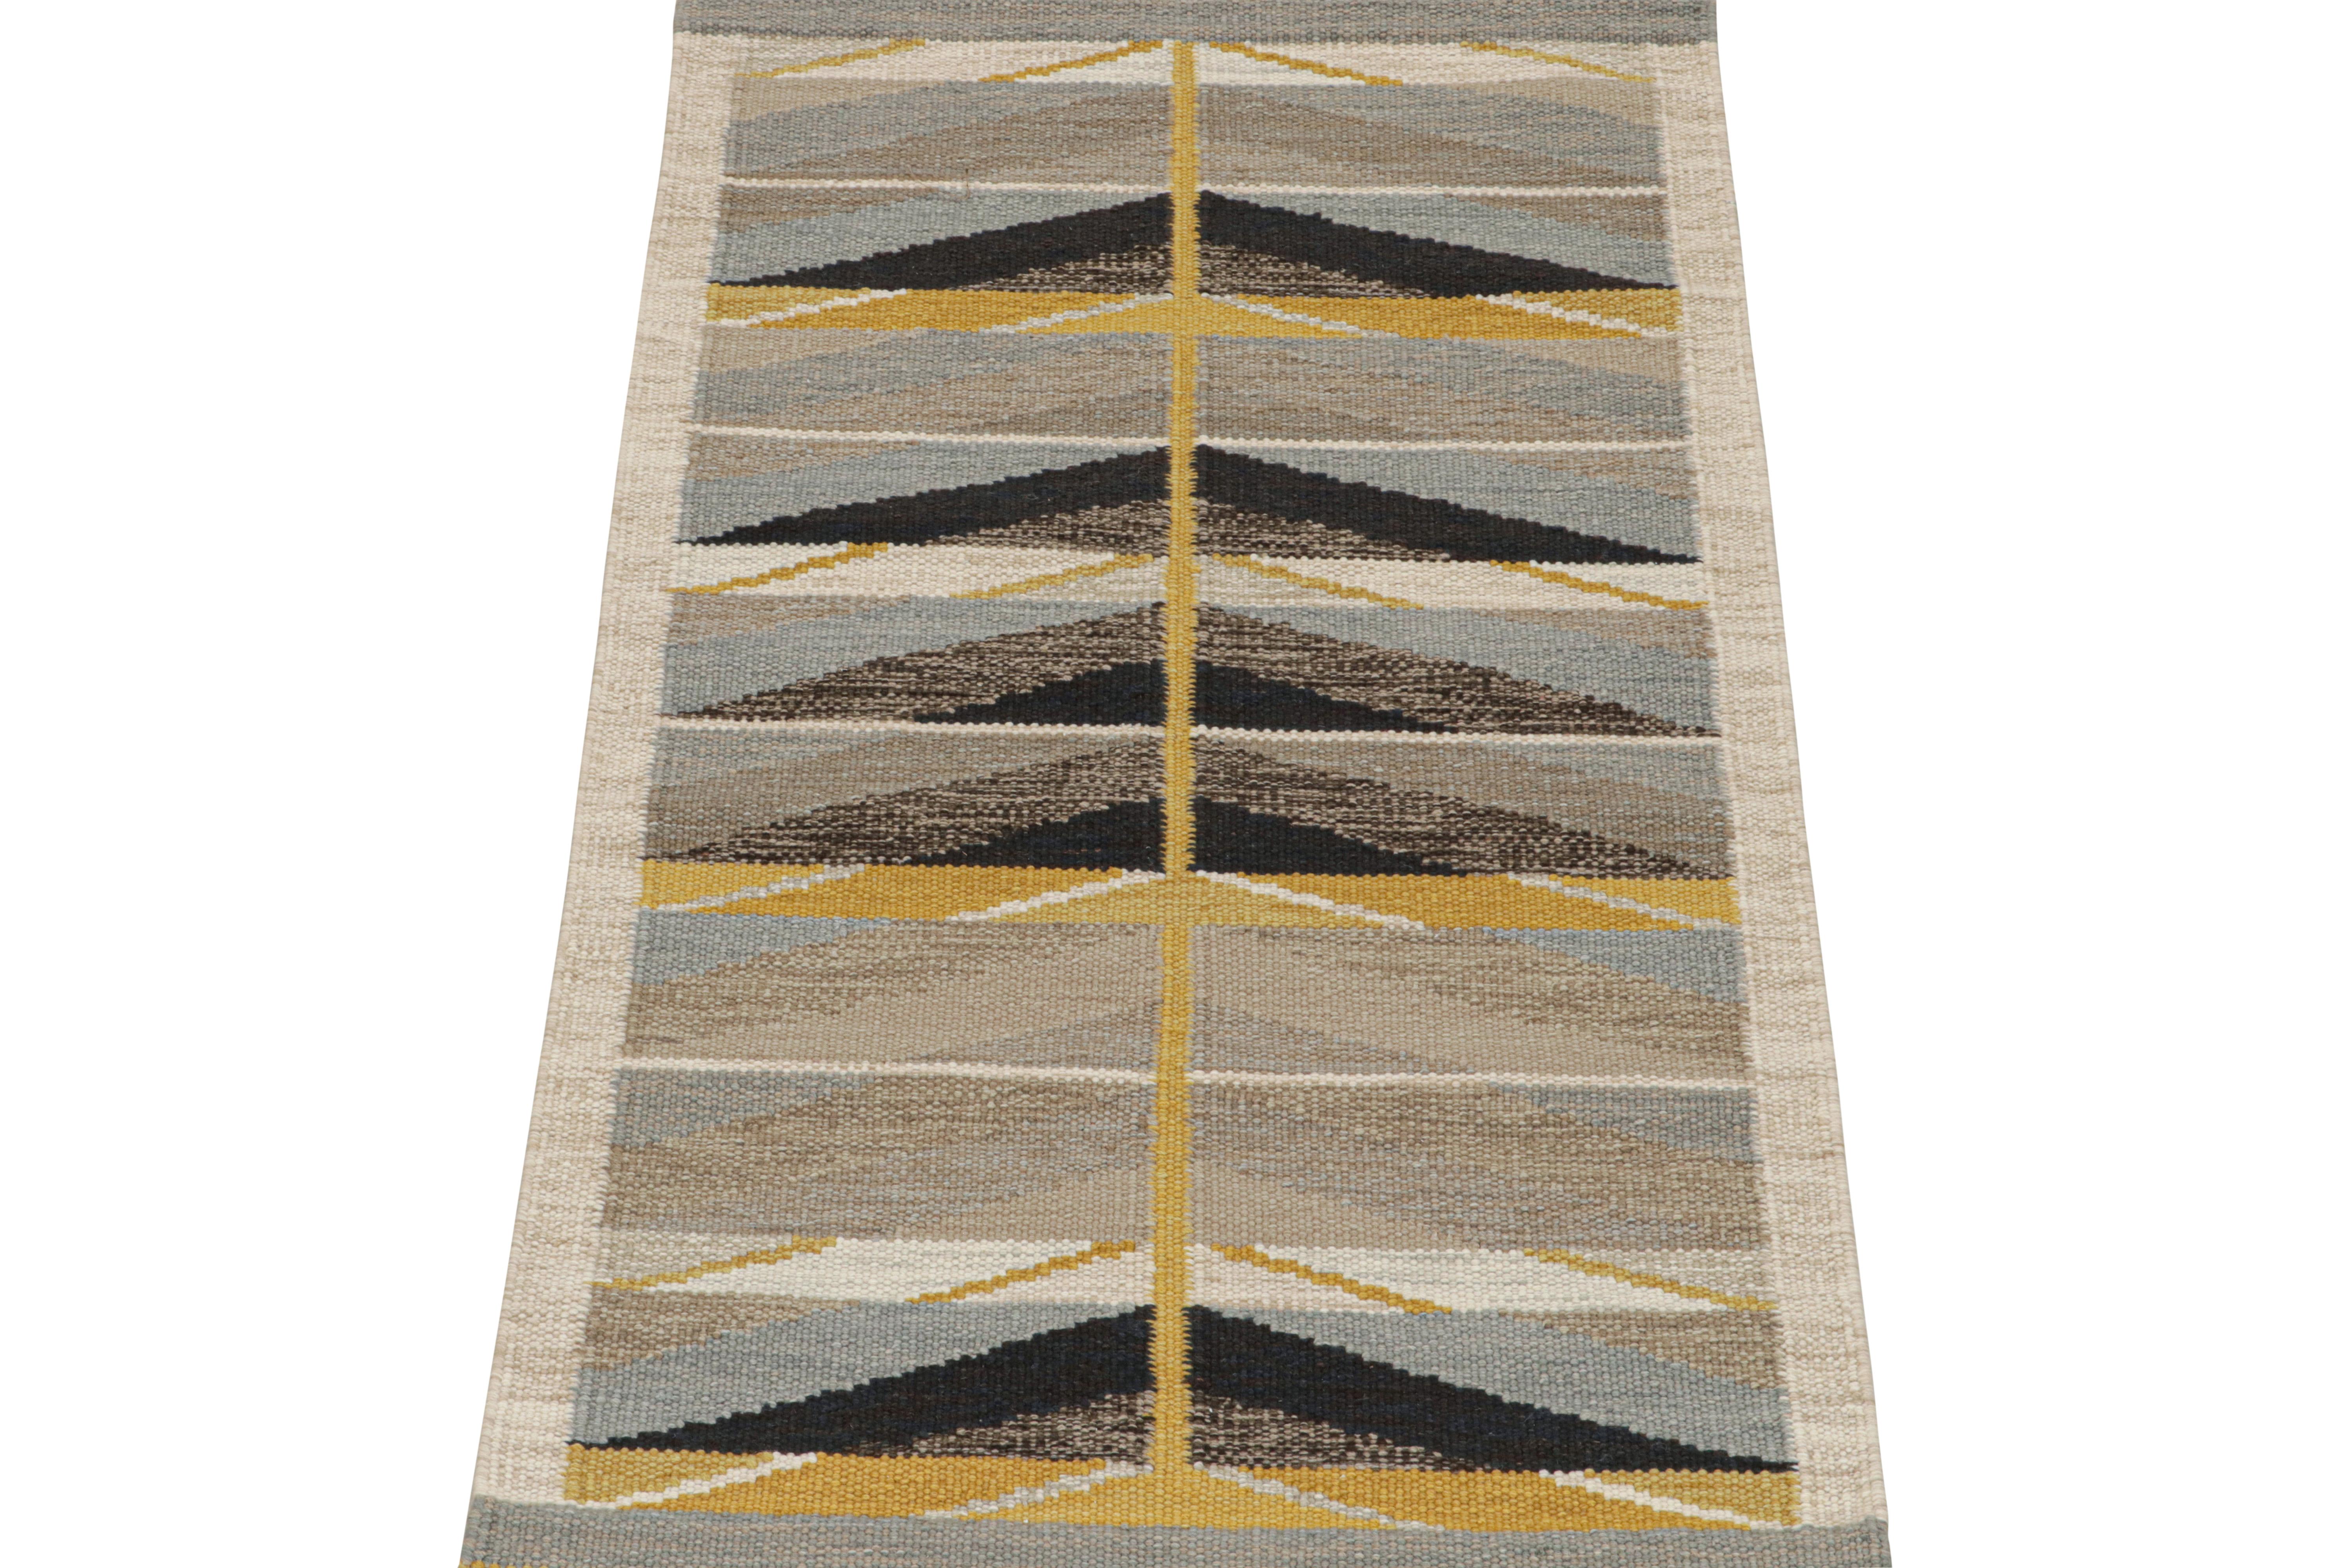 This 3x6 flat weave runner is a bold new addition to the Scandinavian Collection by Rug & Kilim. Handwoven in wool and natural yarns, its design reflects a contemporary take on mid-century Rollakans and Swedish Deco style.

On the Design:

This new